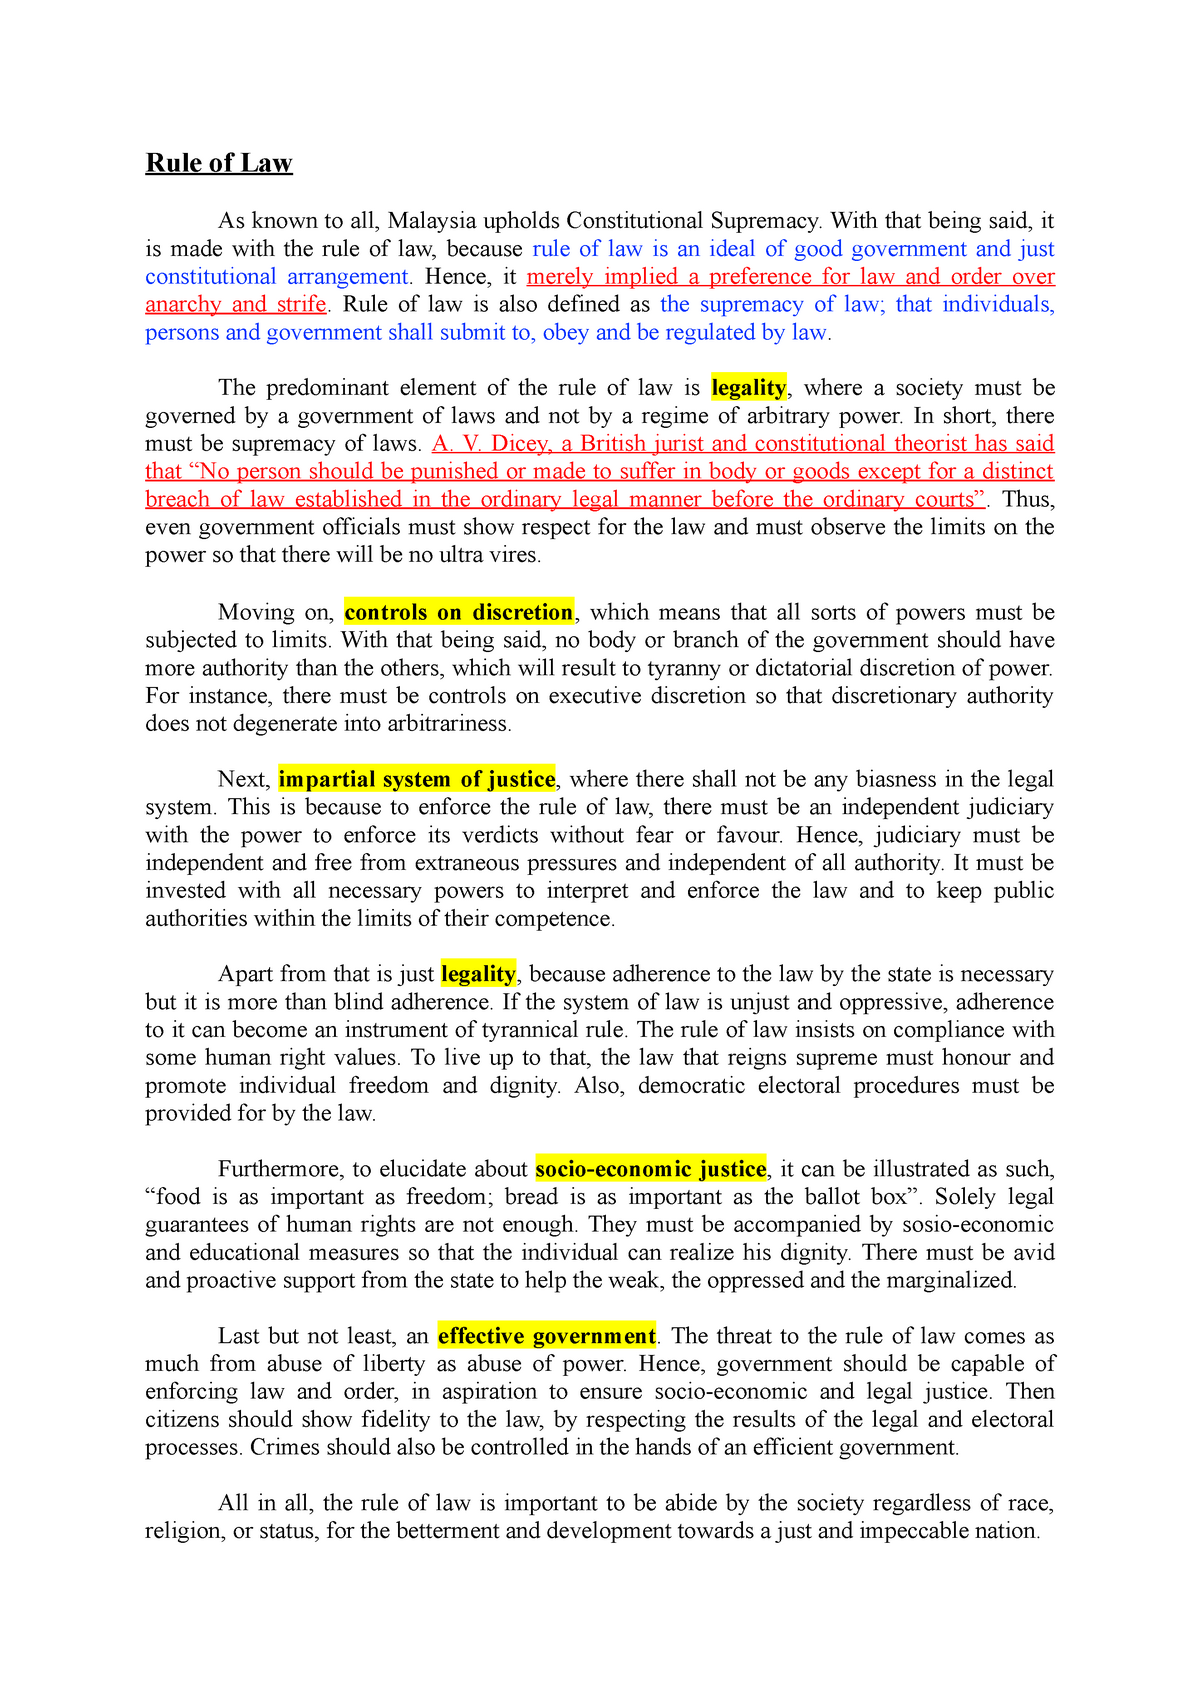 research papers on rule of law